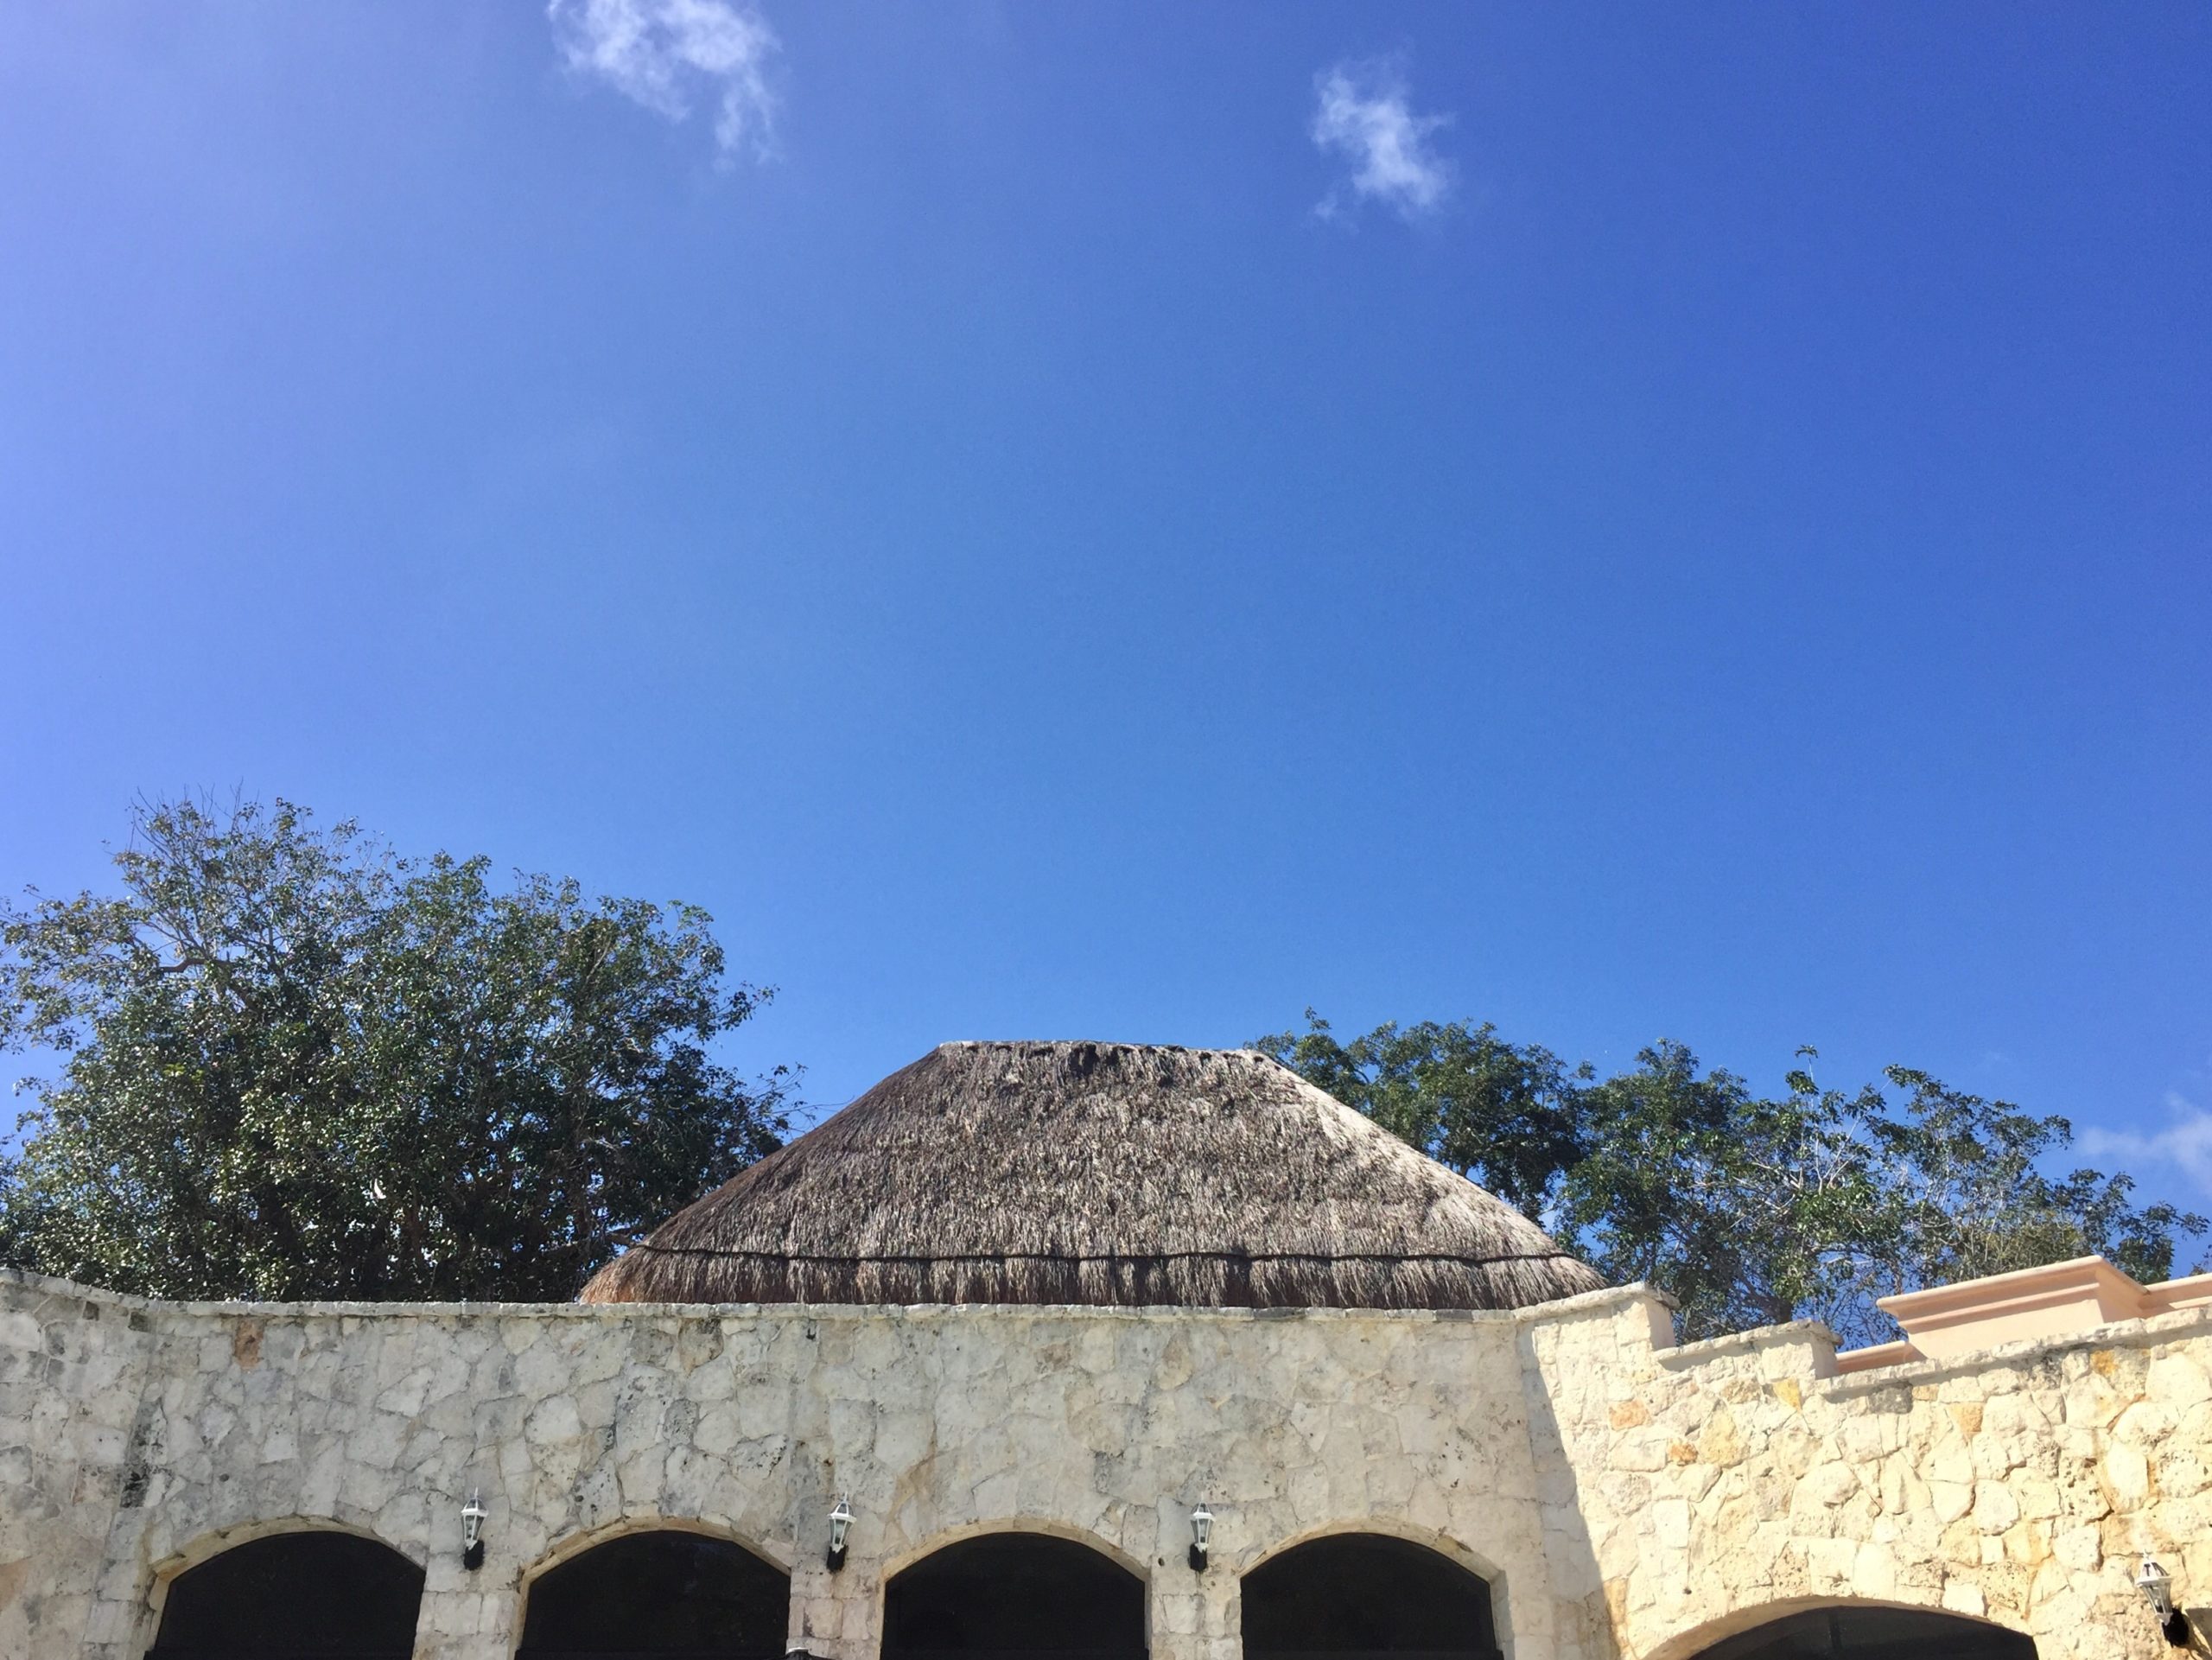 MEXICO TRAVEL DIARY: A LESS THAN IDEAL START